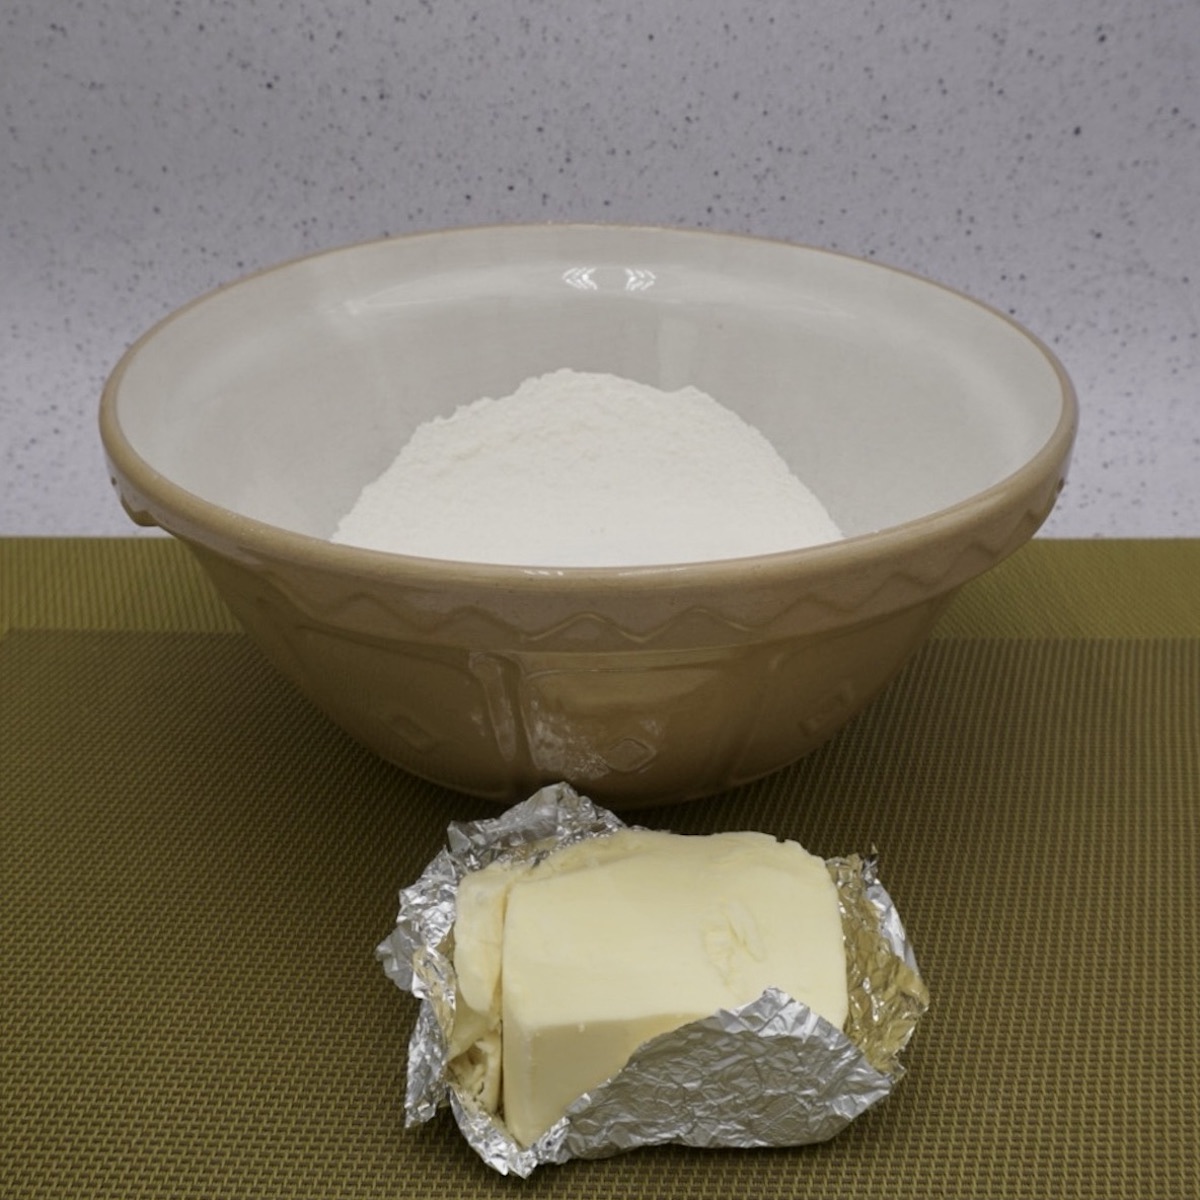 A bowl of flour and a block of butter